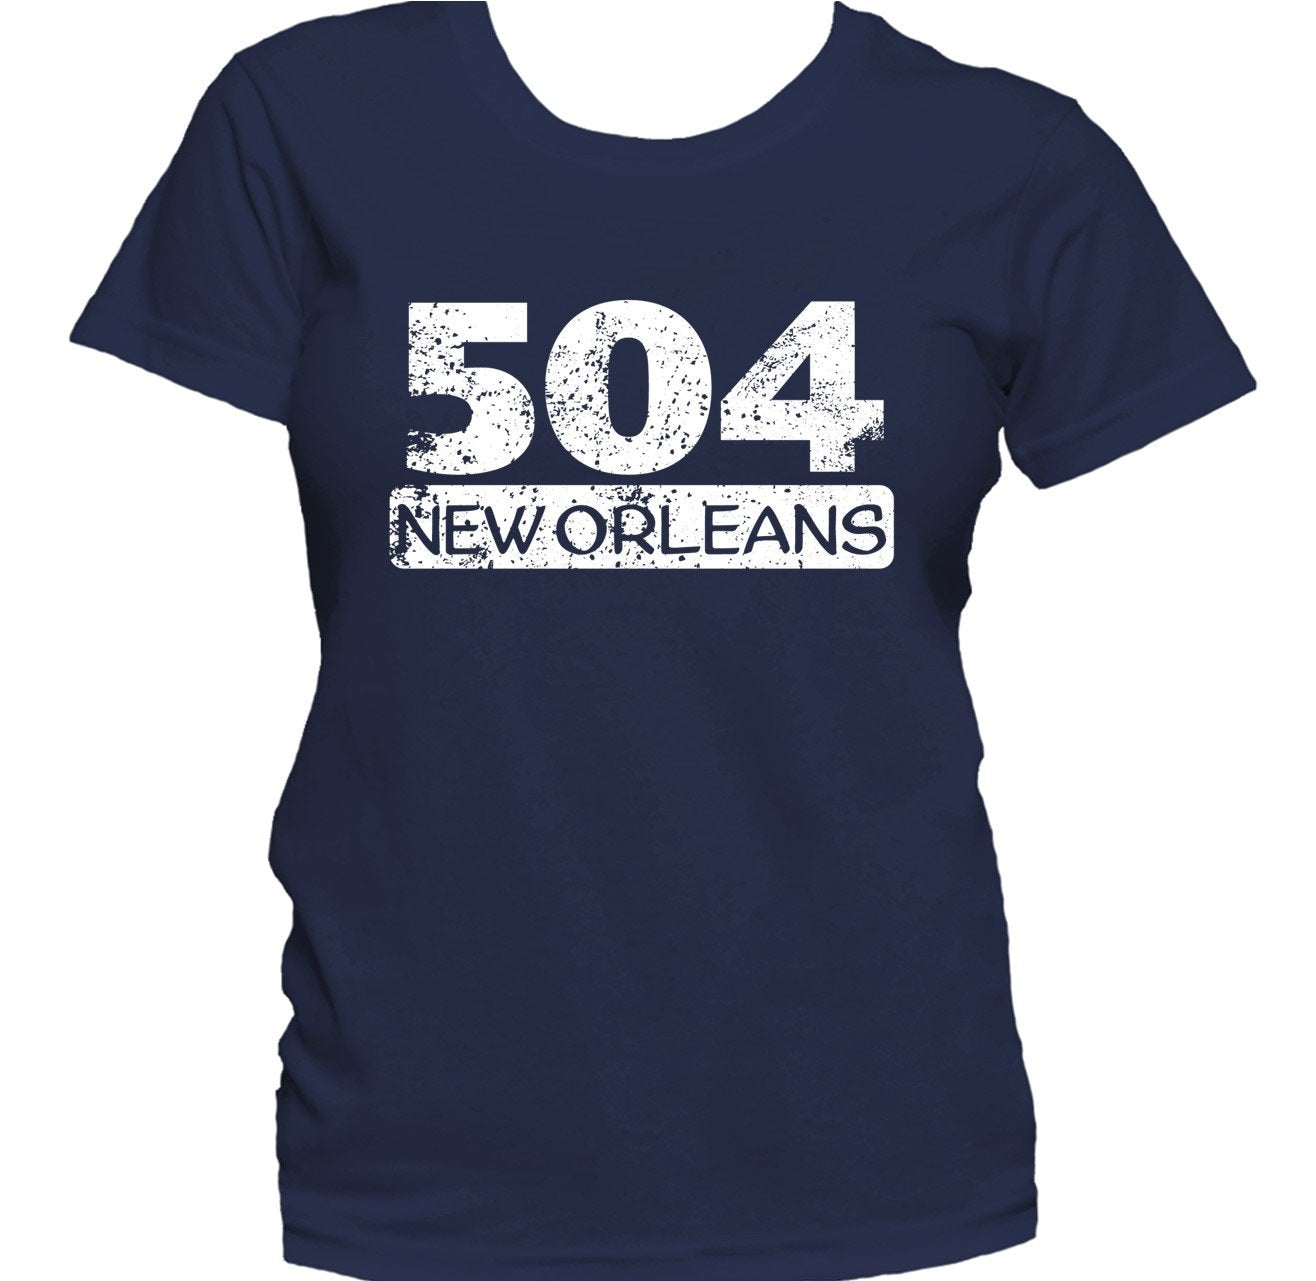 Really Awesome Shirts Retro Style 504 New Orleans Louisiana Area Code Distressed Women's T-Shirt Women's Small / Navy